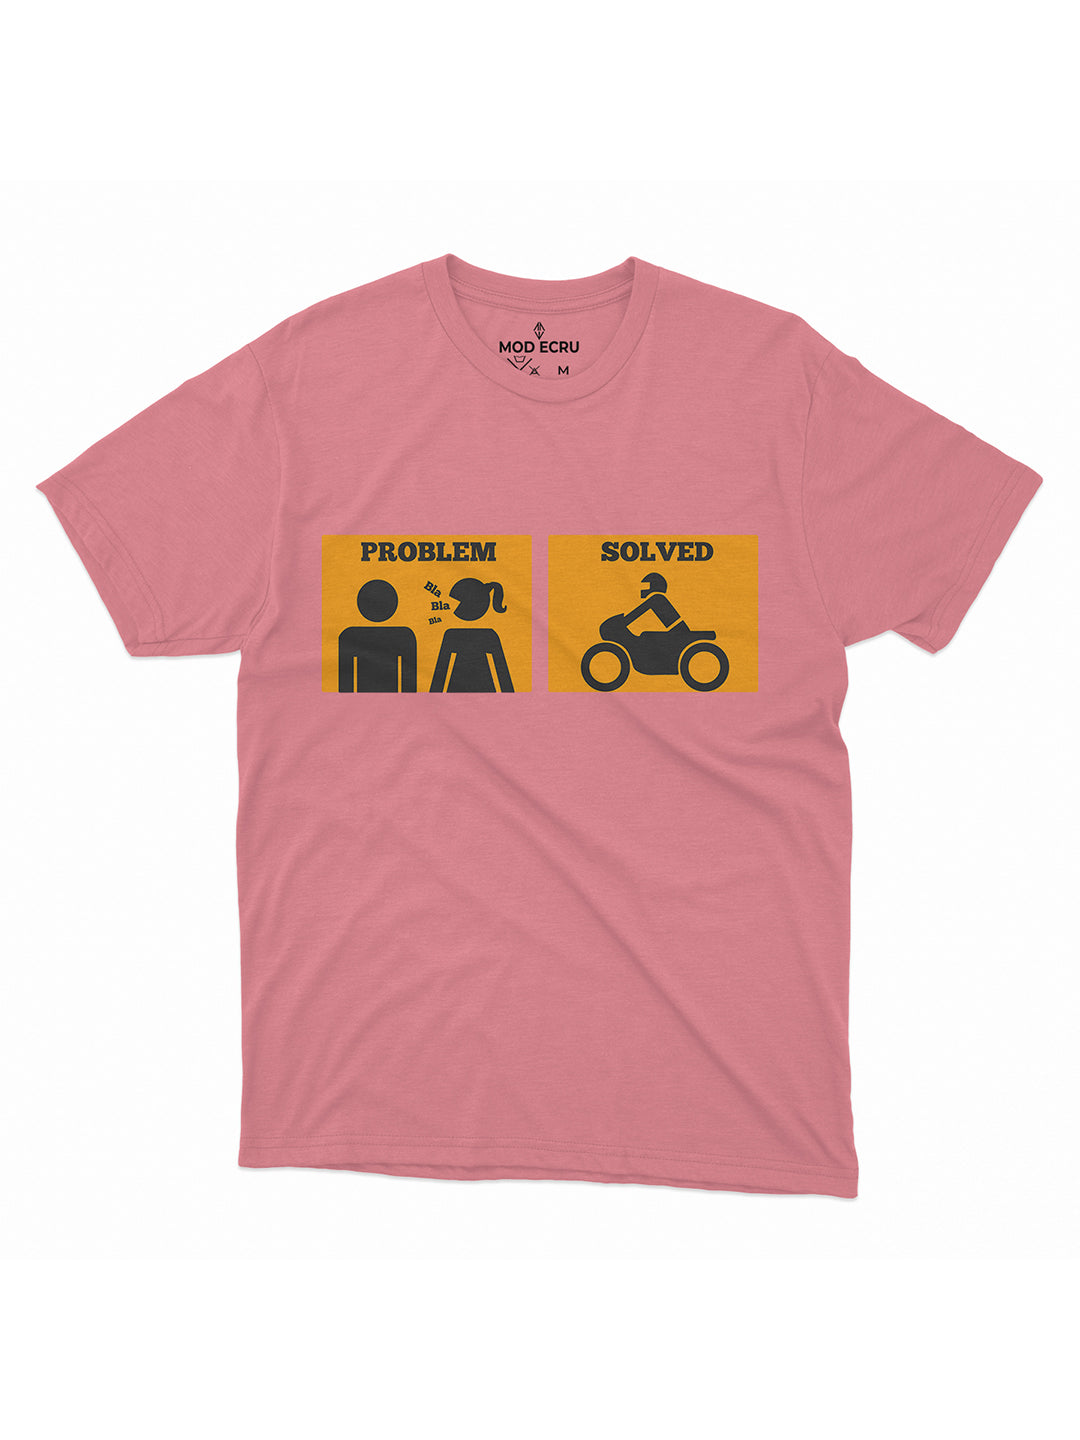 Rider's Problem Solved T-Shirt